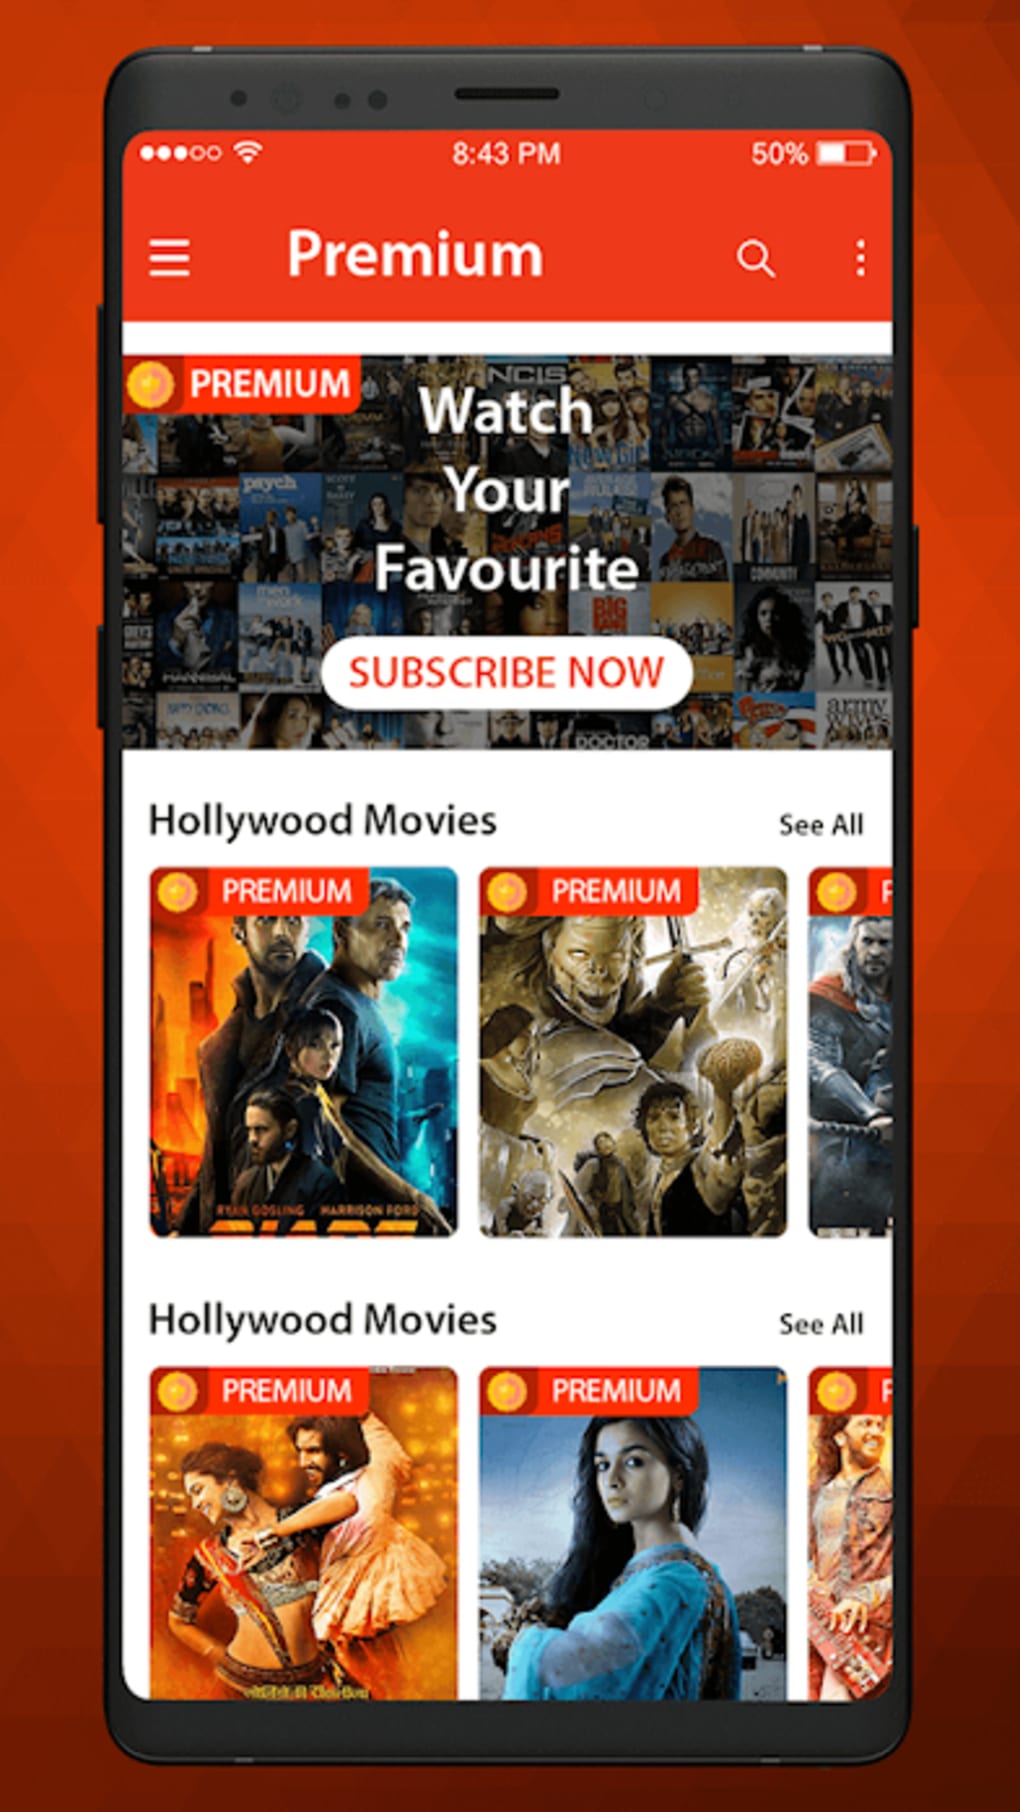 THOP TV v44.1.0 (⚠️ODI Special) : The Hub of PREMIUM TV's :Watch All Live  tv , Movies and shows Completely FREE - Softwares / Mod Applications &  Games - TamilBlasters | Tamil